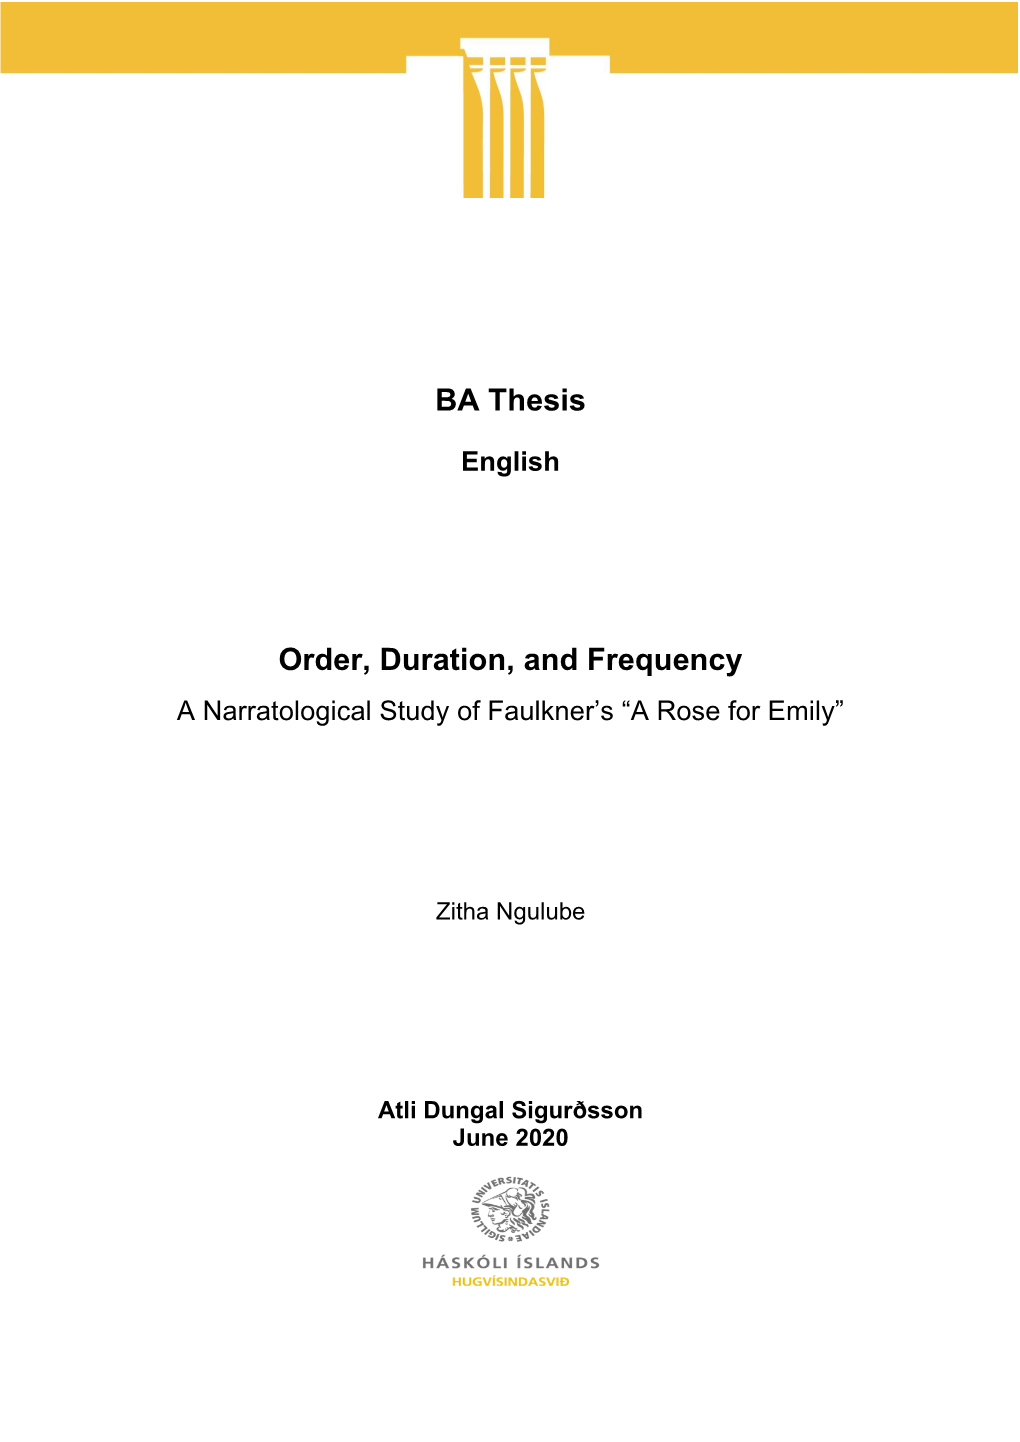 BA Thesis Order, Duration, and Frequency